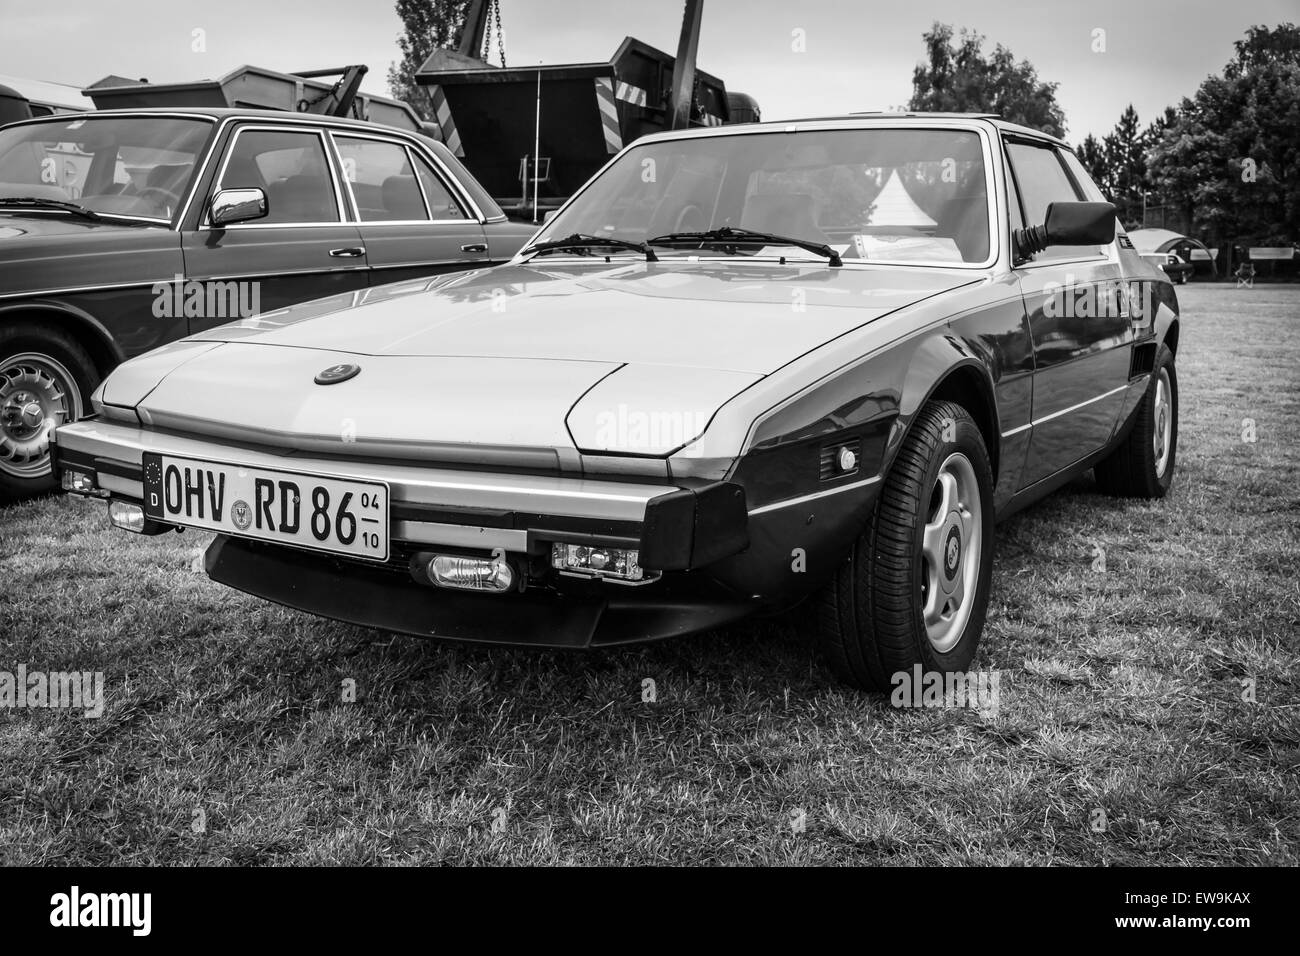 PAAREN IM GLIEN, GERMANY - MAY 23, 2015: Sports car Bertone X1/9 (Fiat X1/9), 1984. Black and white. The oldtimer show in MAFZ. Stock Photo